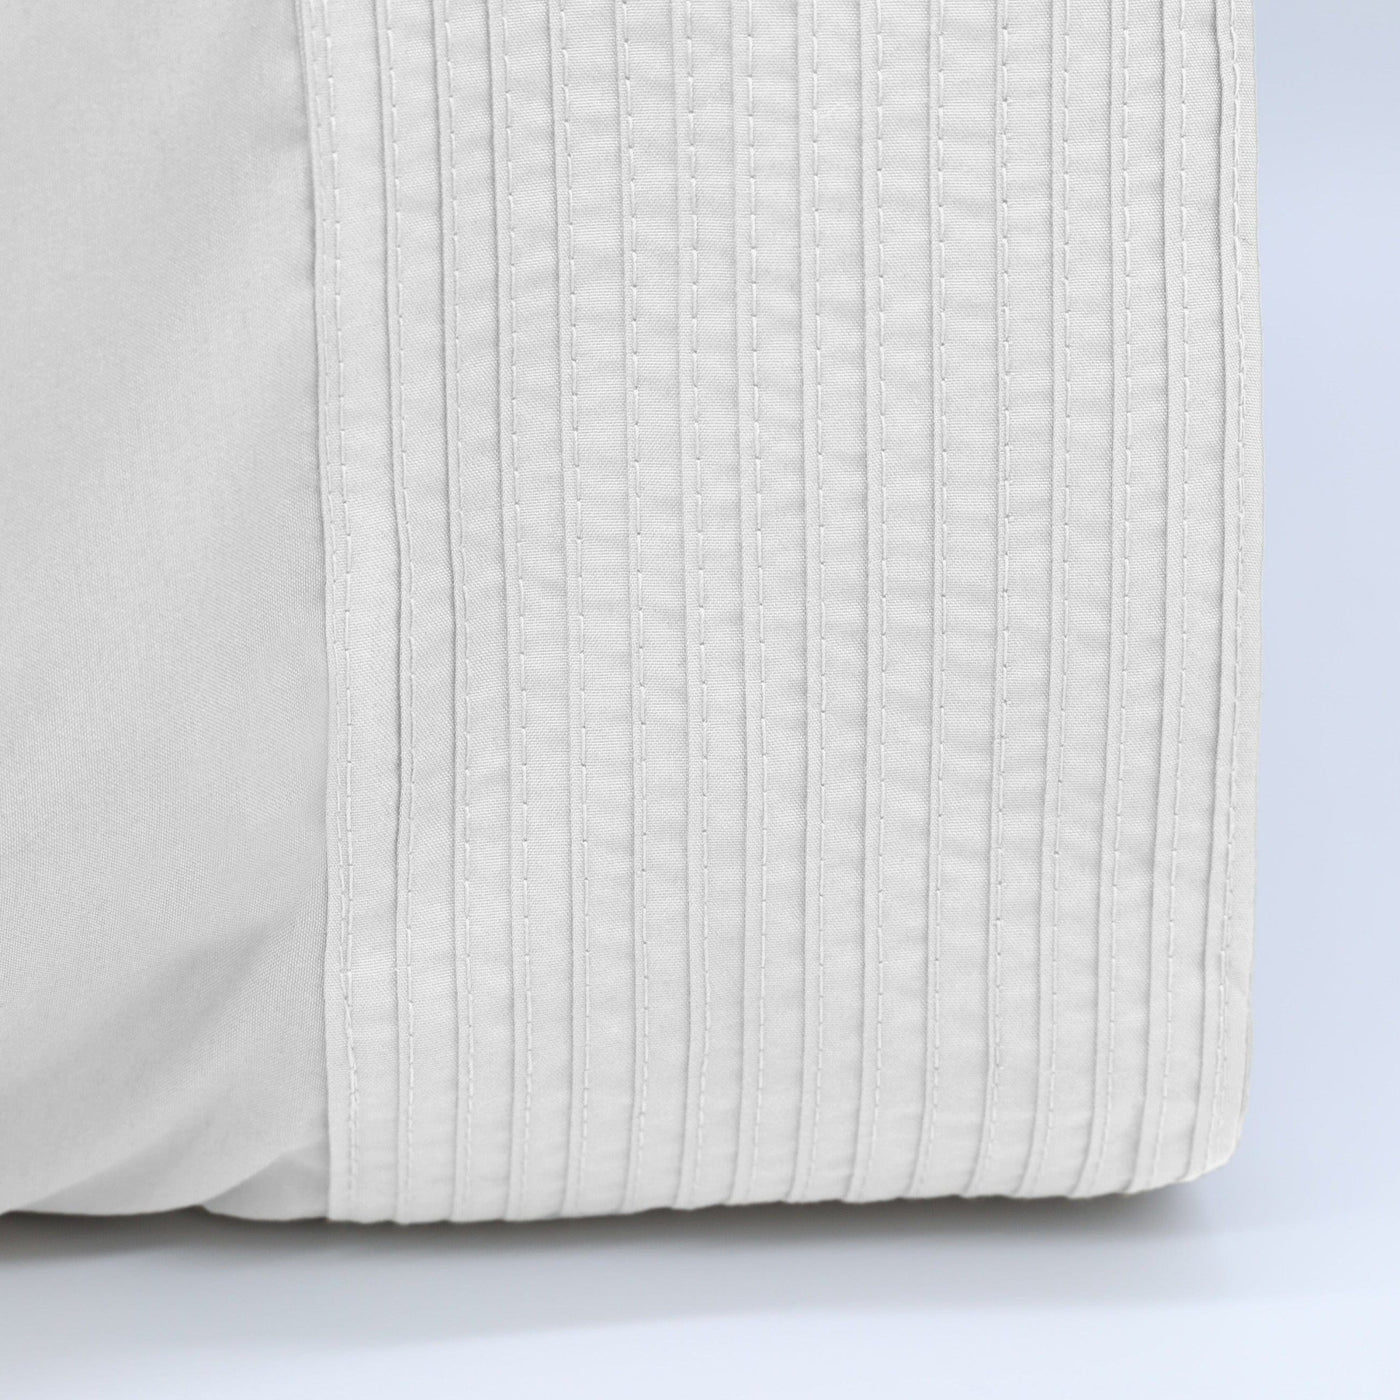 Details and Texture of Vilano Pleated Pillow Cases in White#color_vilano-bright-white